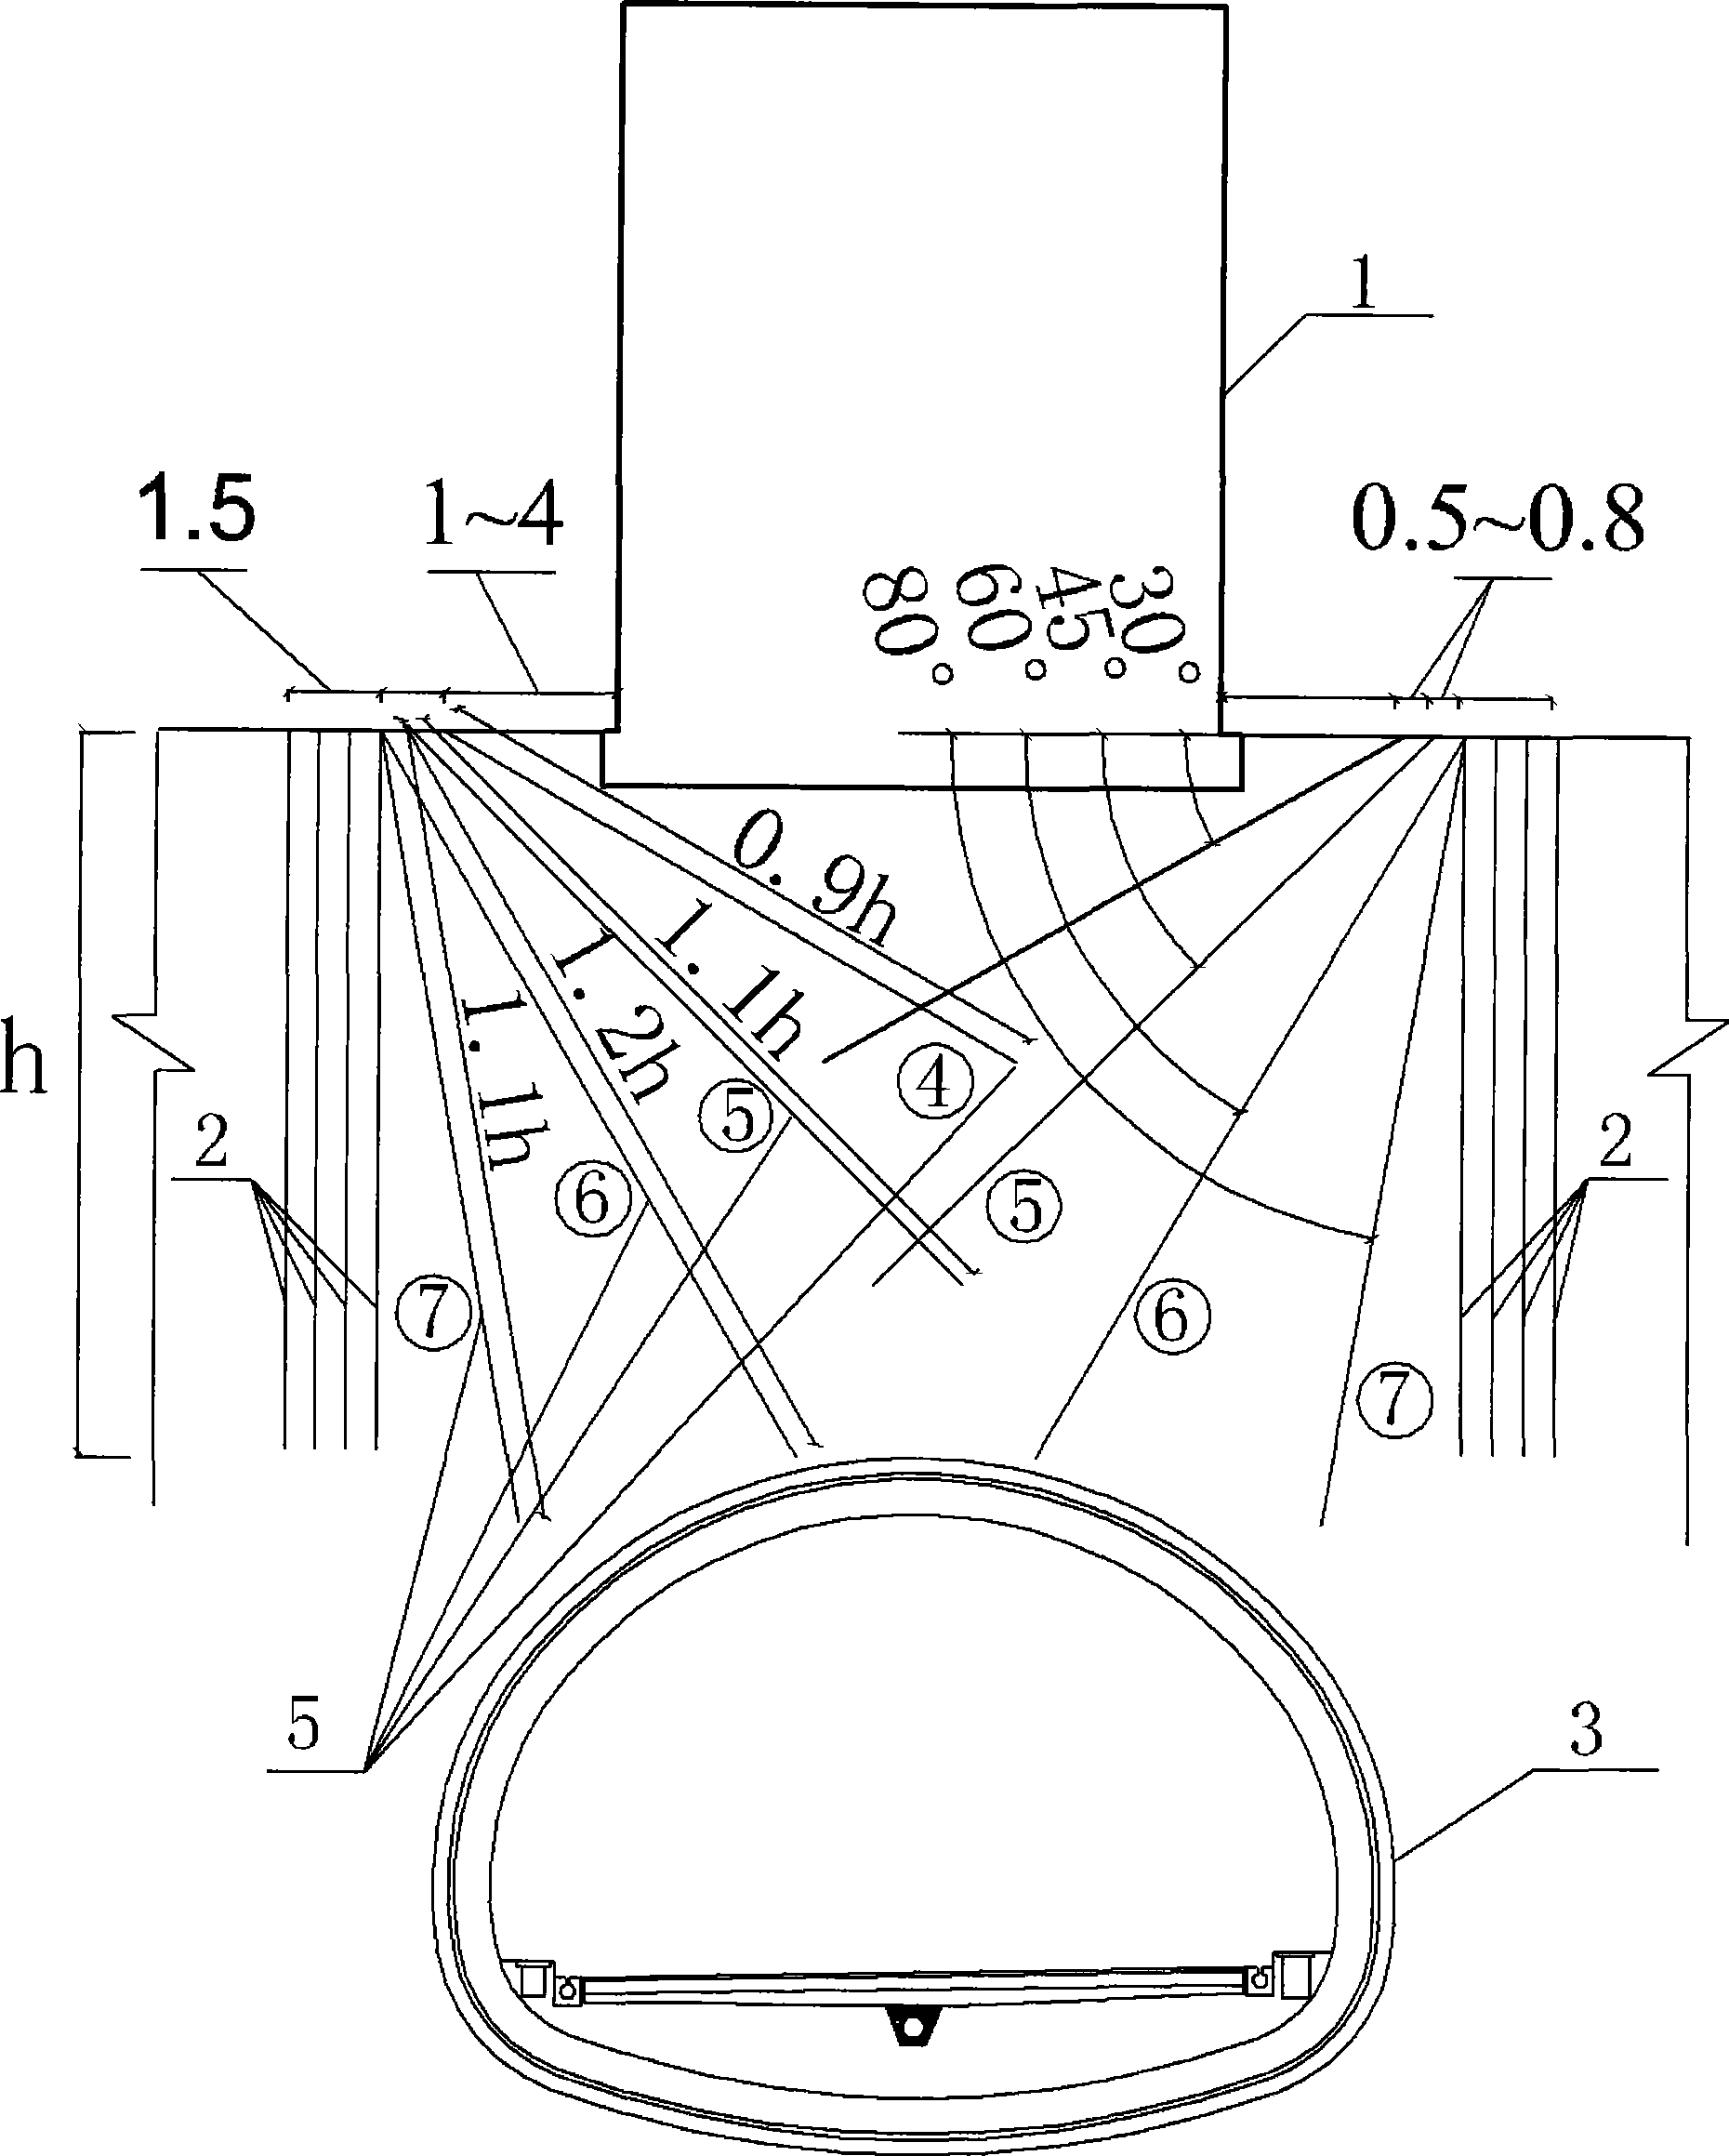 Slip-casting lifting method for city tunnel passing through existing buildings